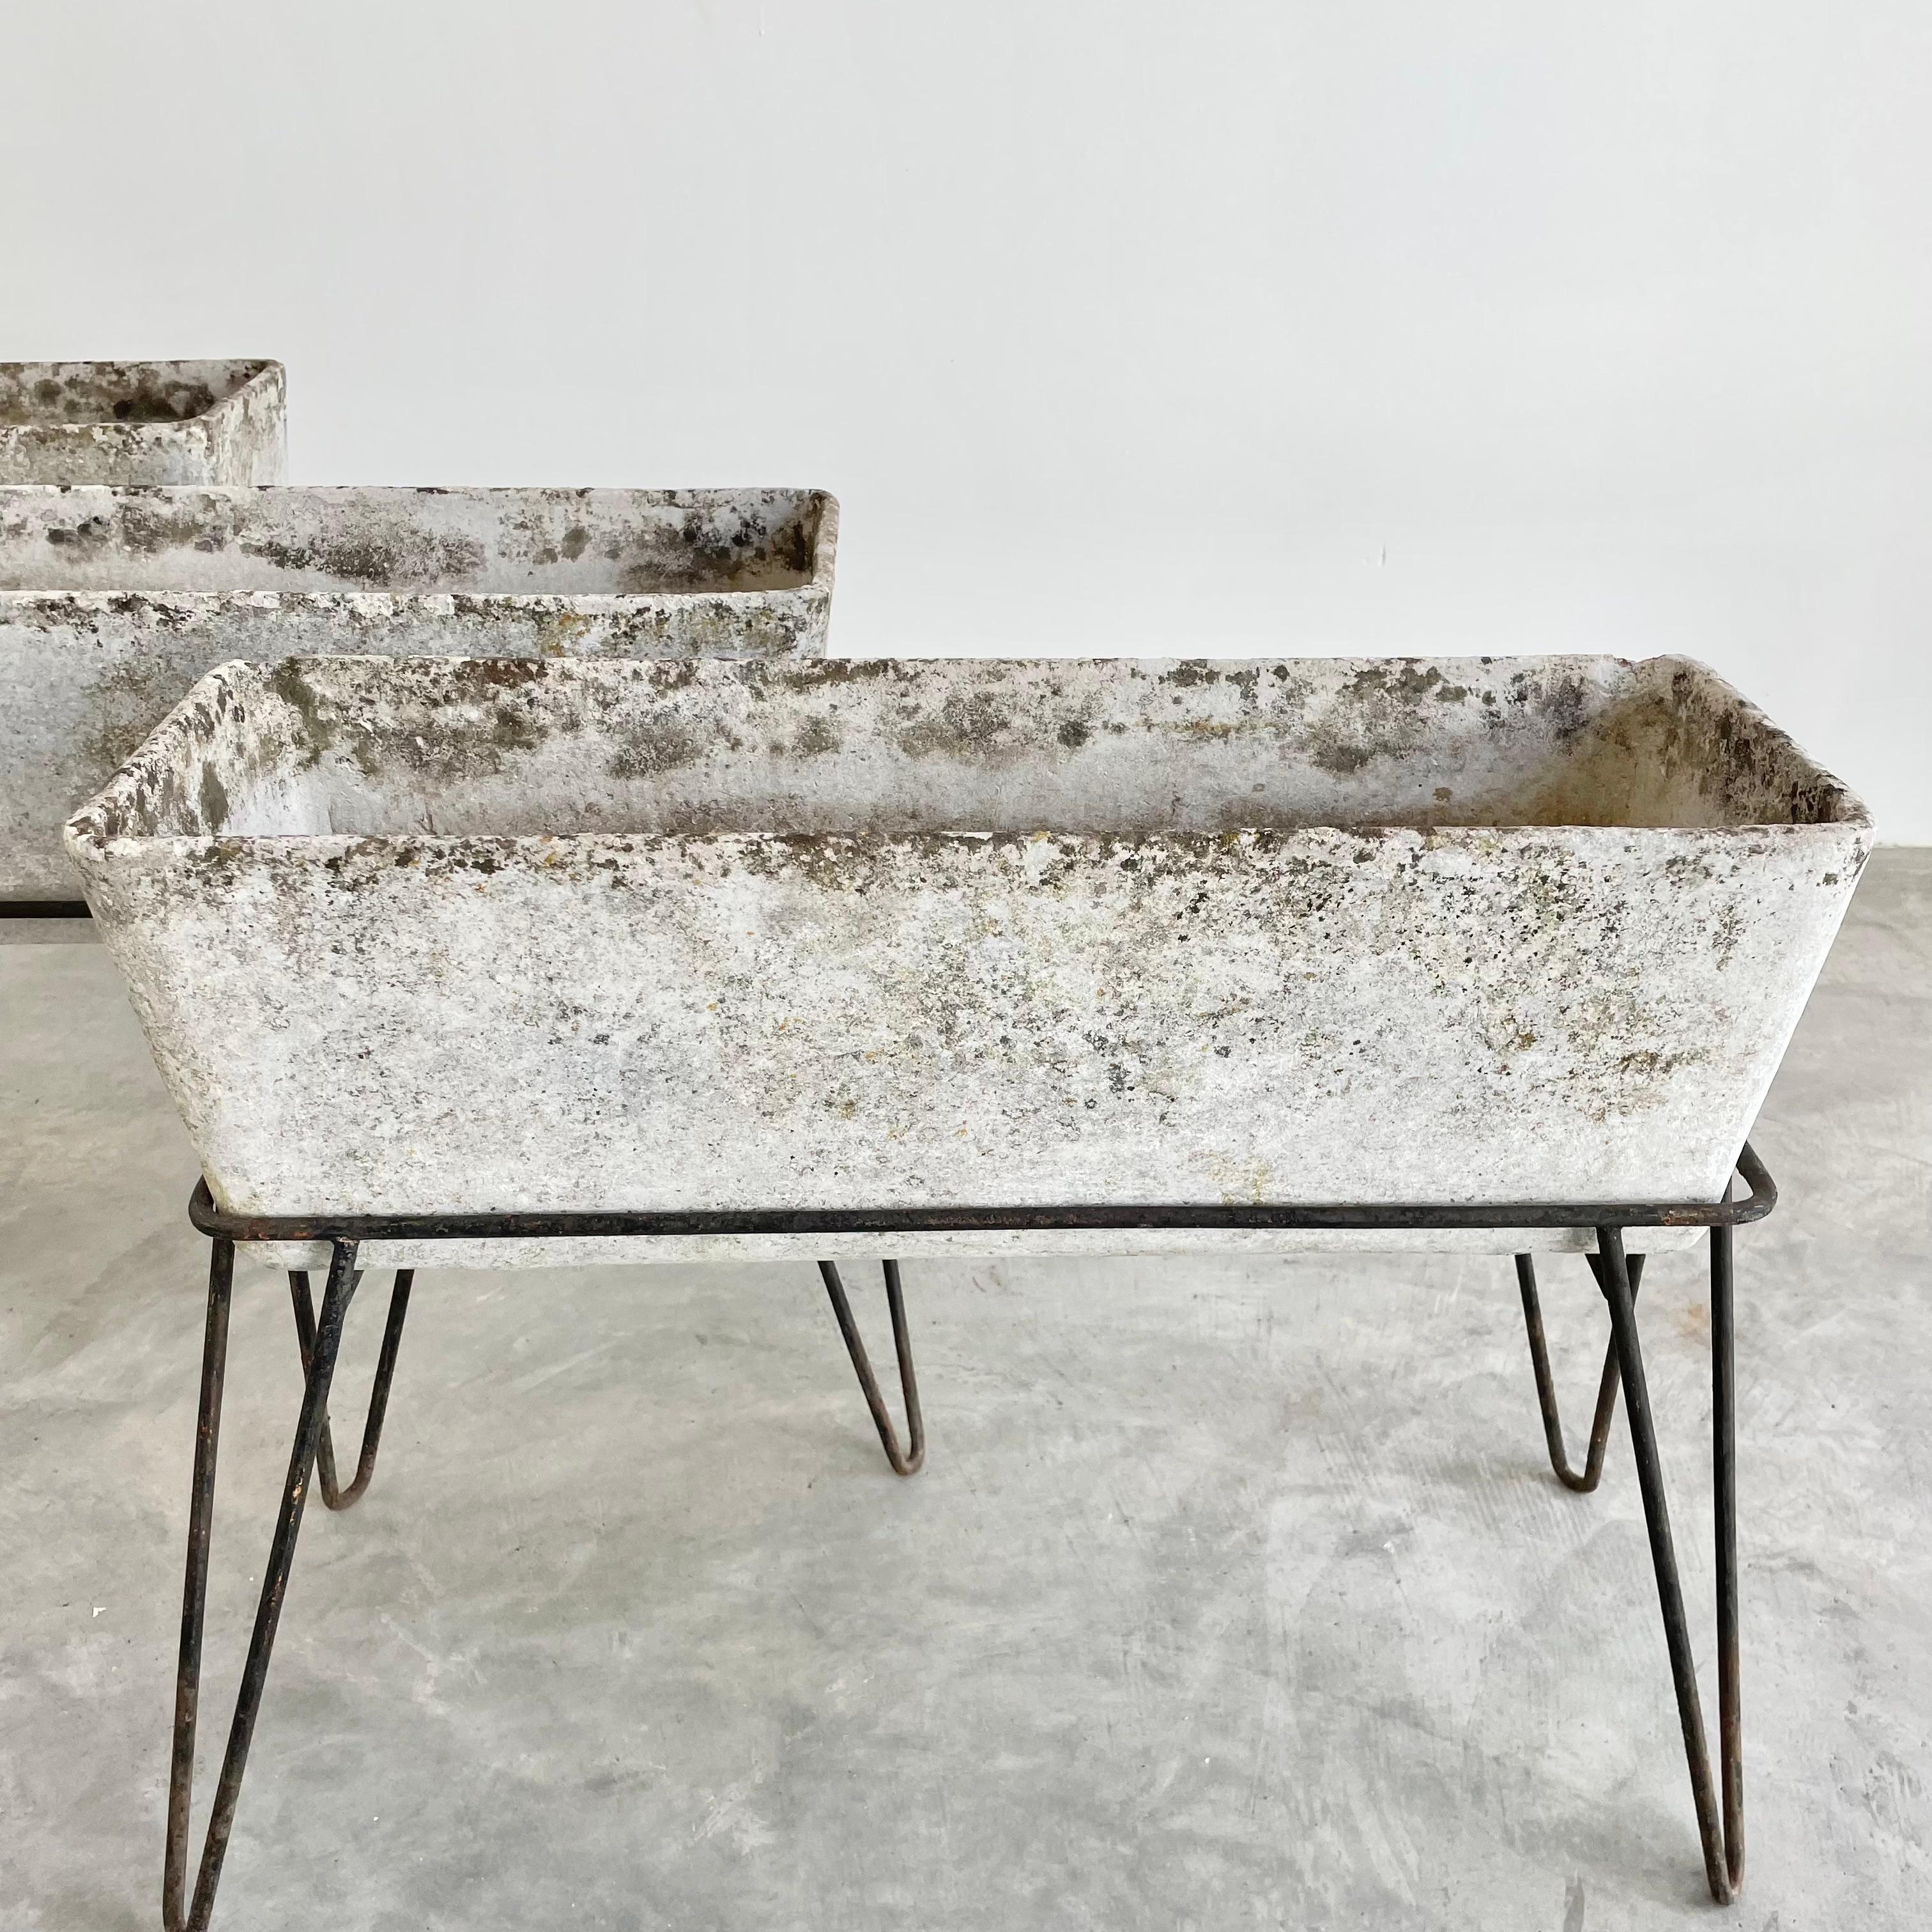 Willy Guhl Concrete Trough Planter on Iron Hairpin Stand, 1975 Switzerland For Sale 5